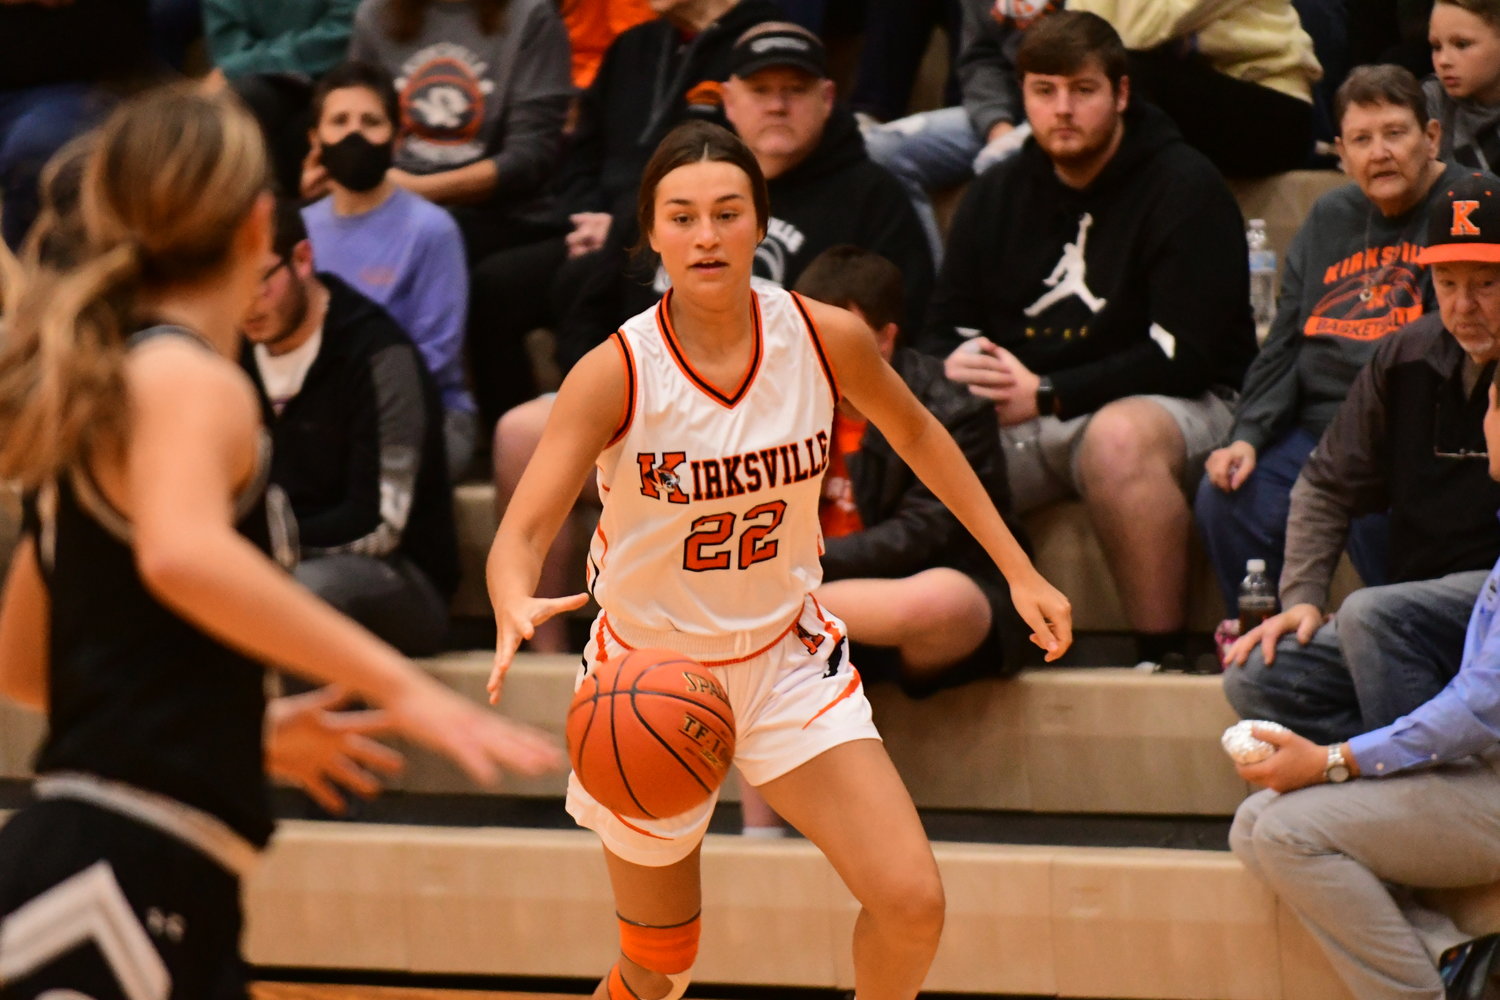 Kirksville's Jenna Jackson competes during Thursday's home game against Centralia.